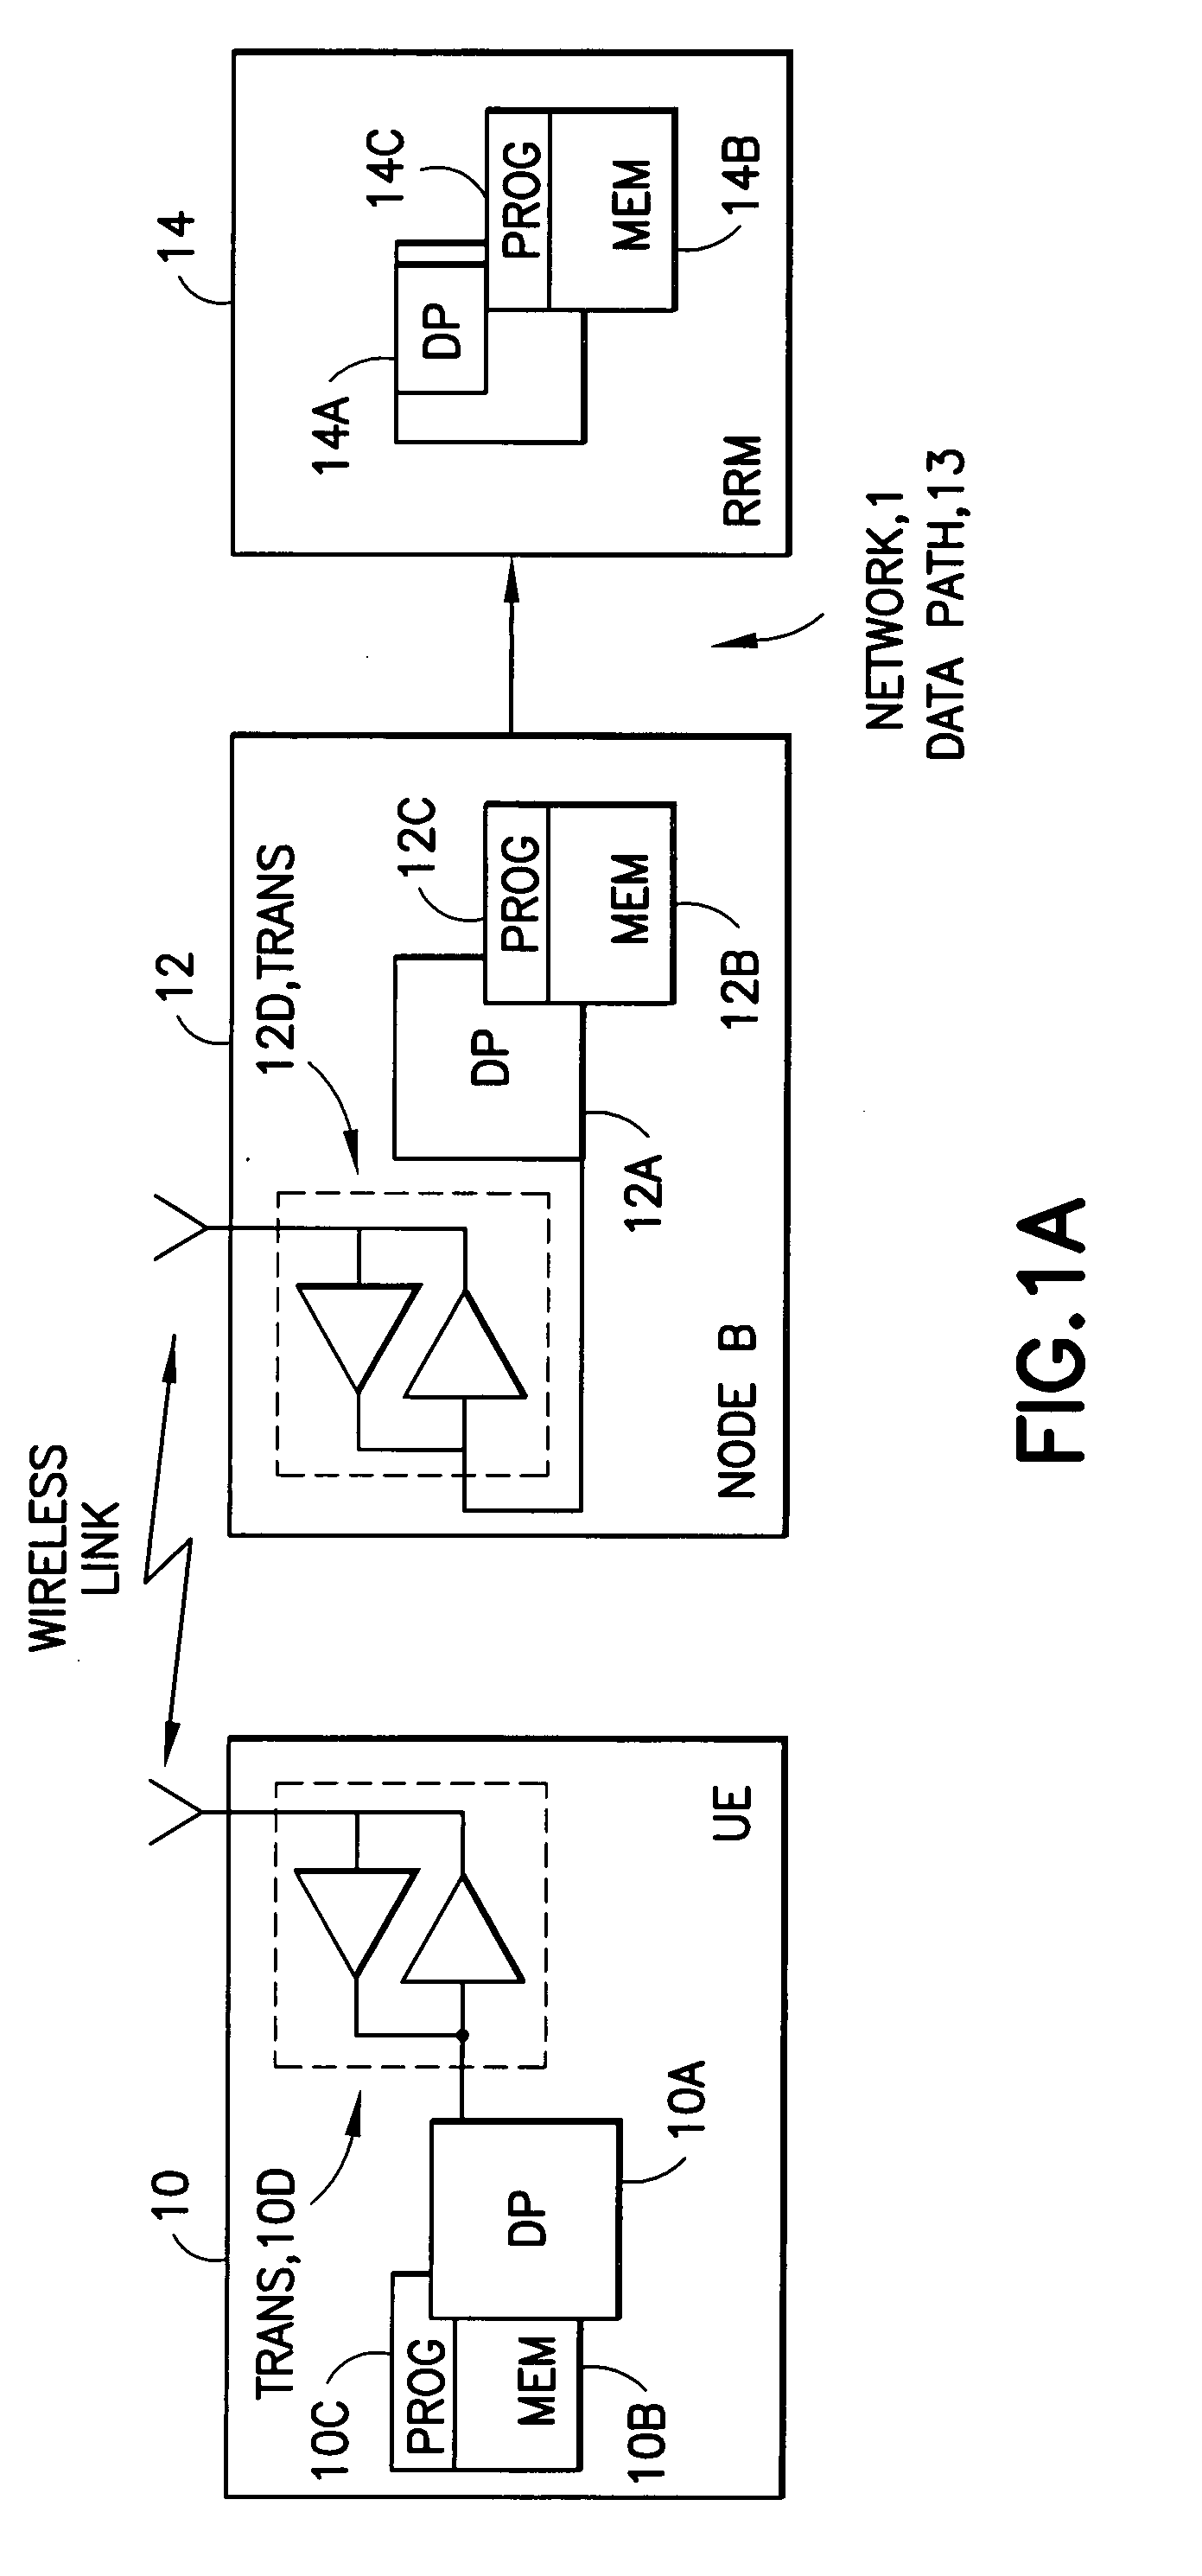 Apparatus, method and computer program product providing frequency domain multiplexed multicast and unicast transmissions